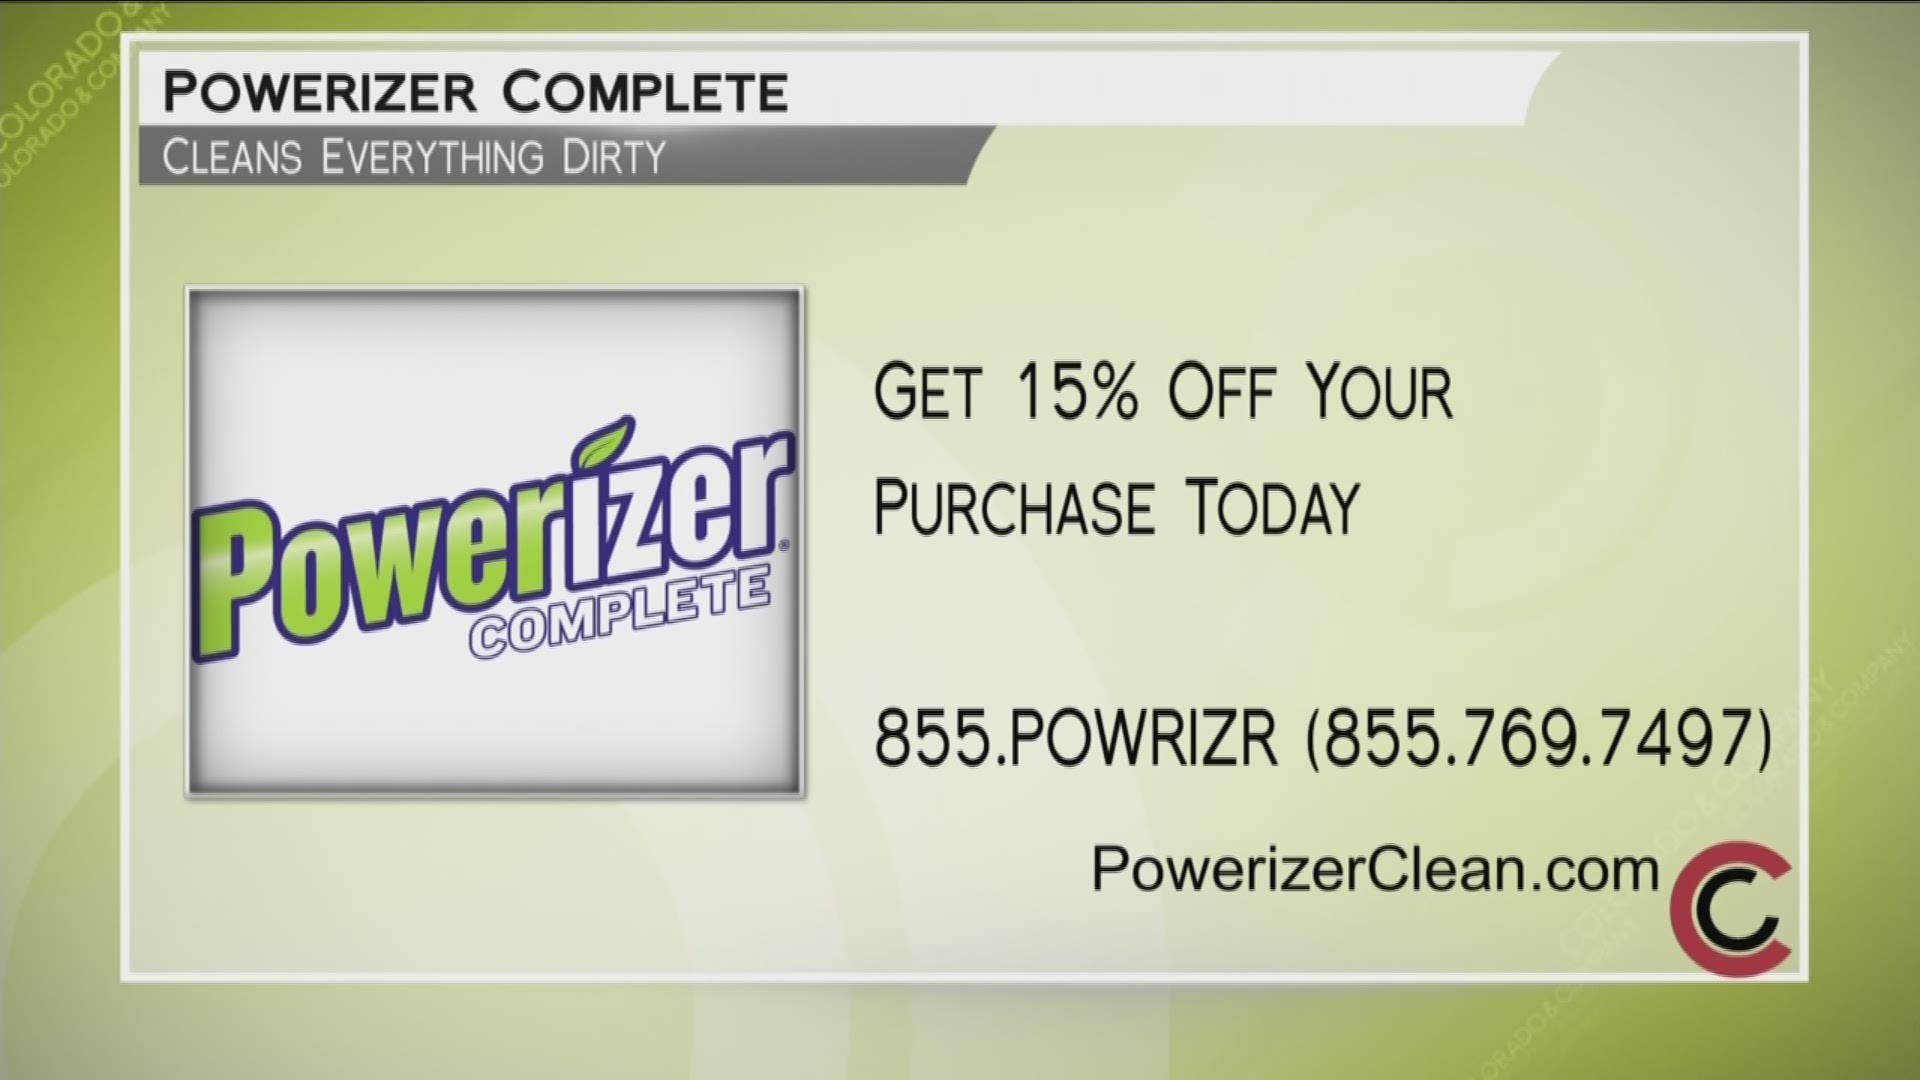 Try Powerizer today and save money and time with one cleaner that DOES IT ALL. Pour it, wipe it, mop it, or scrub it. Take 15% off your Powerizer purchase today with Promo Code COCO9 at checkout. Order now by calling 855.POWRIZR, or 855.769.7497, or www.PowerizerClean.com. 
THIS INTERVIEW HAS COMMERCIAL CONTENT. PRODUCTS AND SERVICES FEATURED APPEAR AS PAID ADVERTISING.